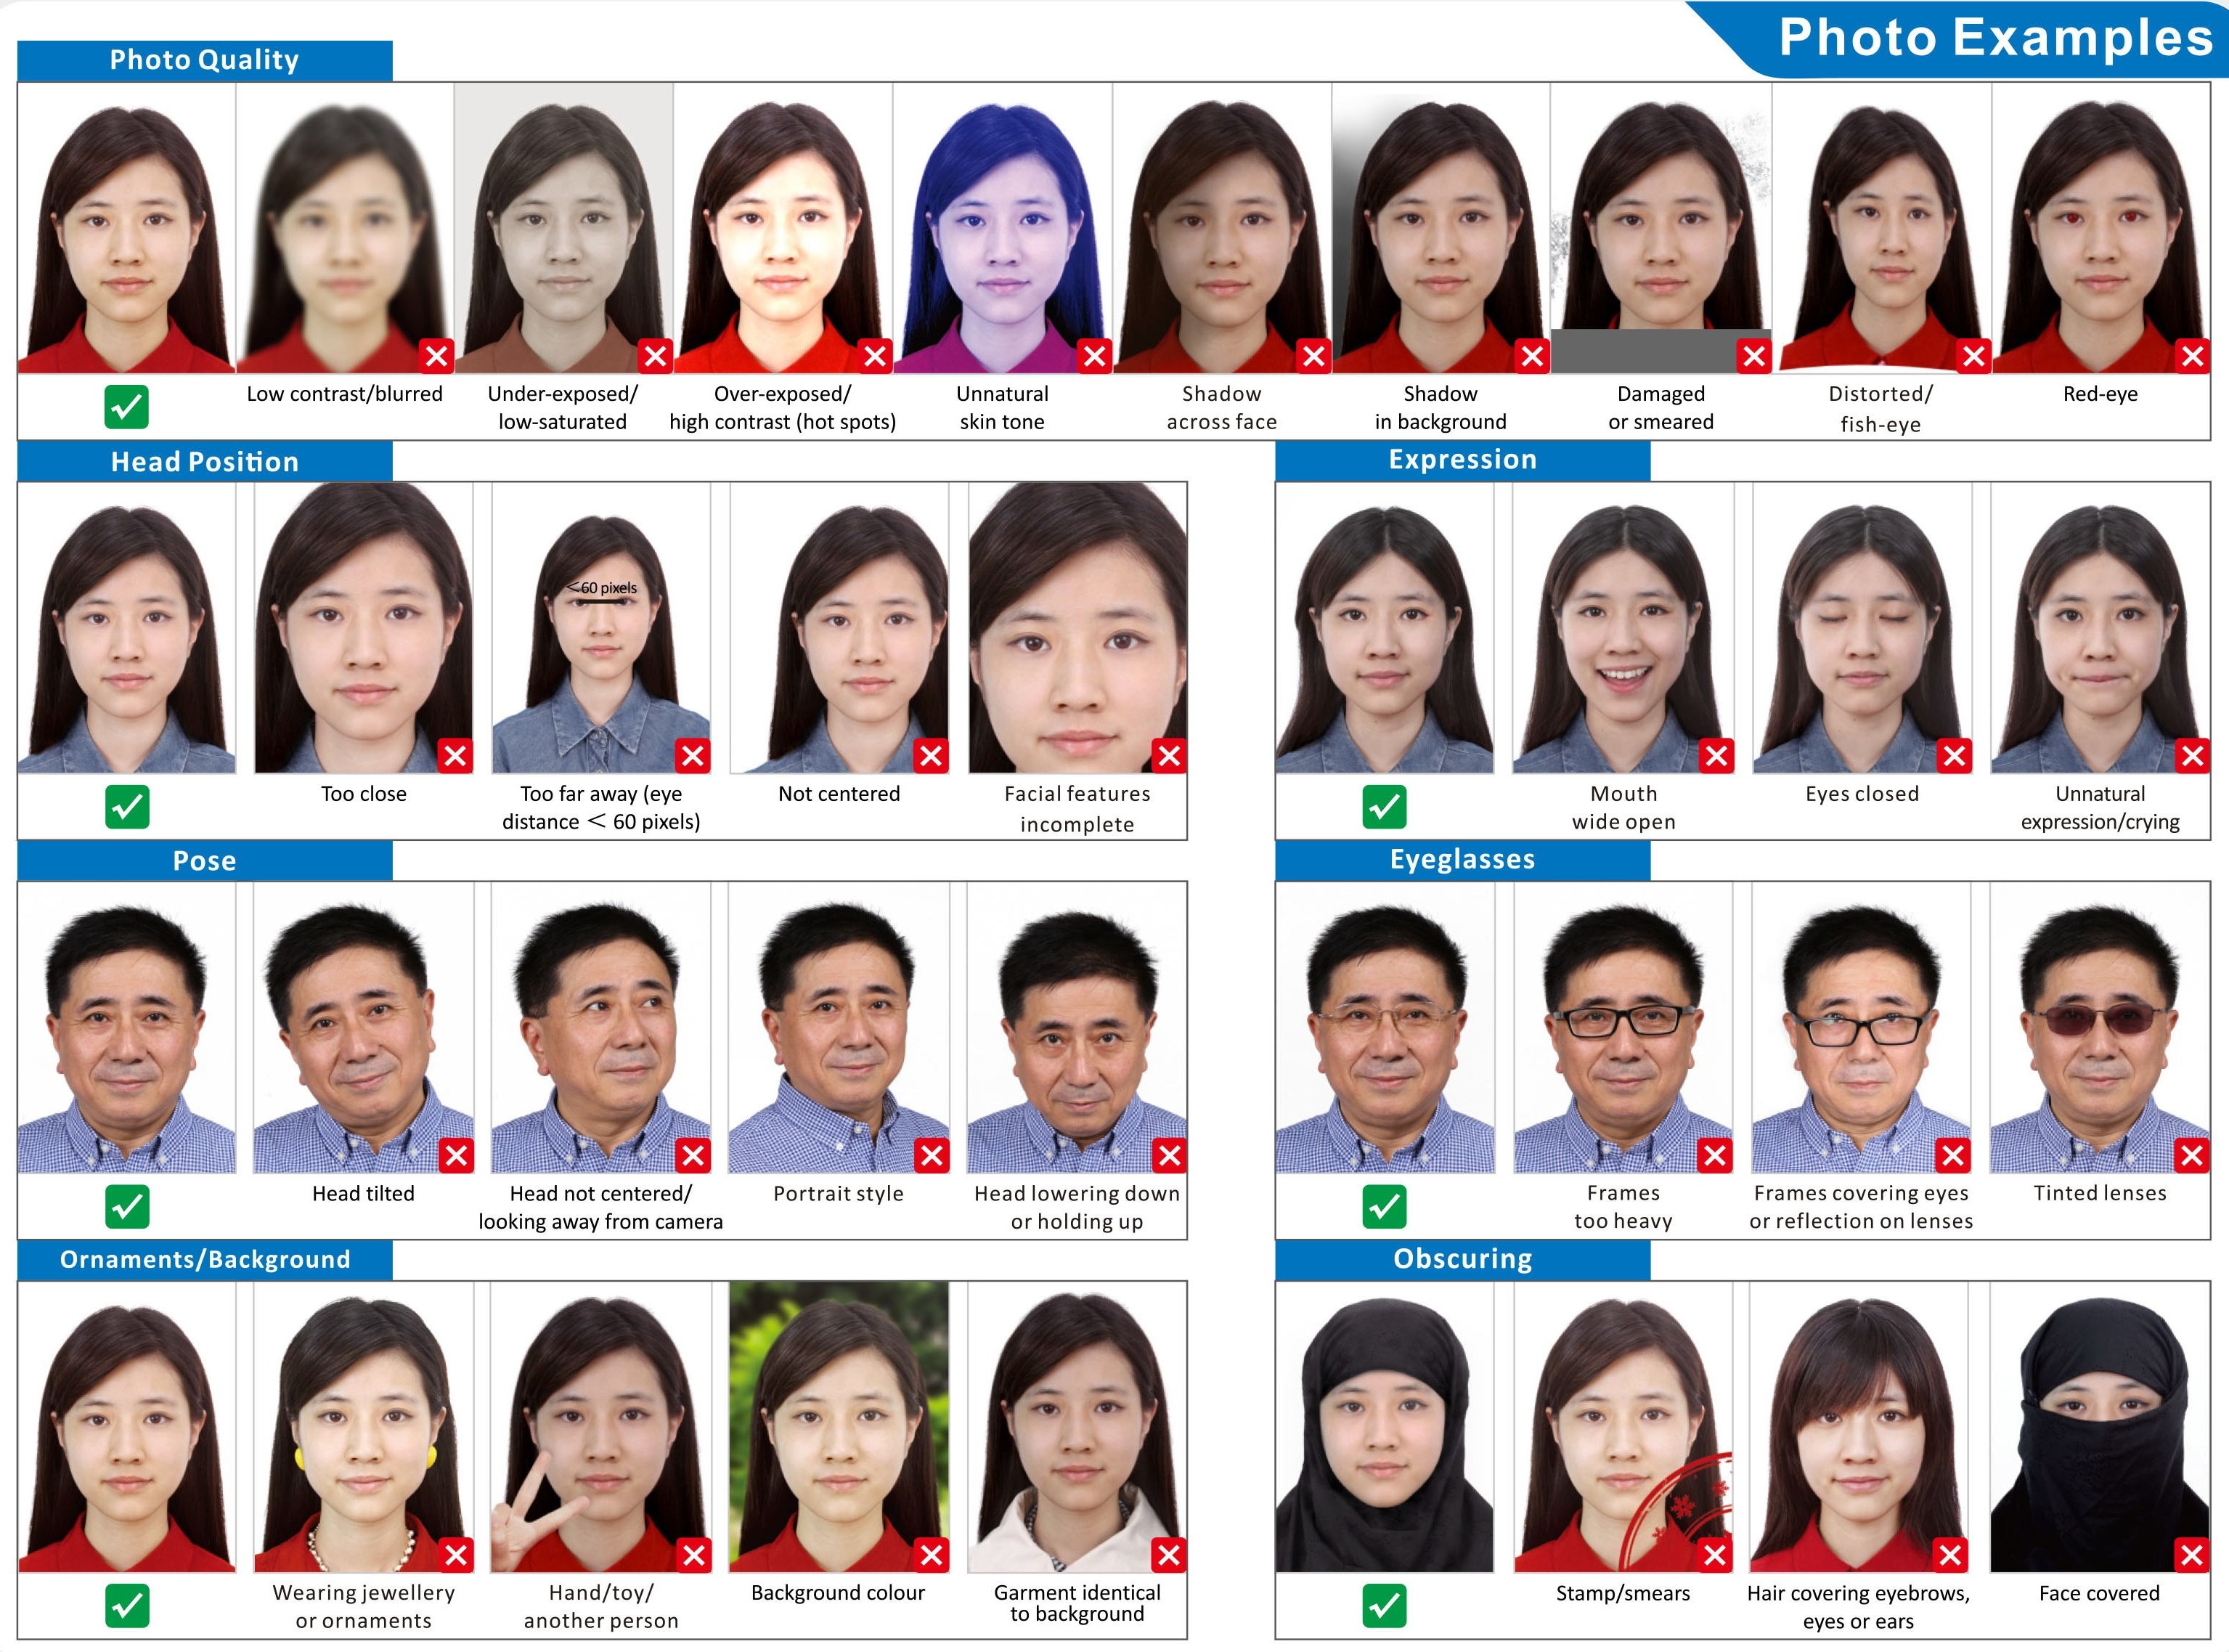 Photo Requirements for Chinese Visa ApplicationNews